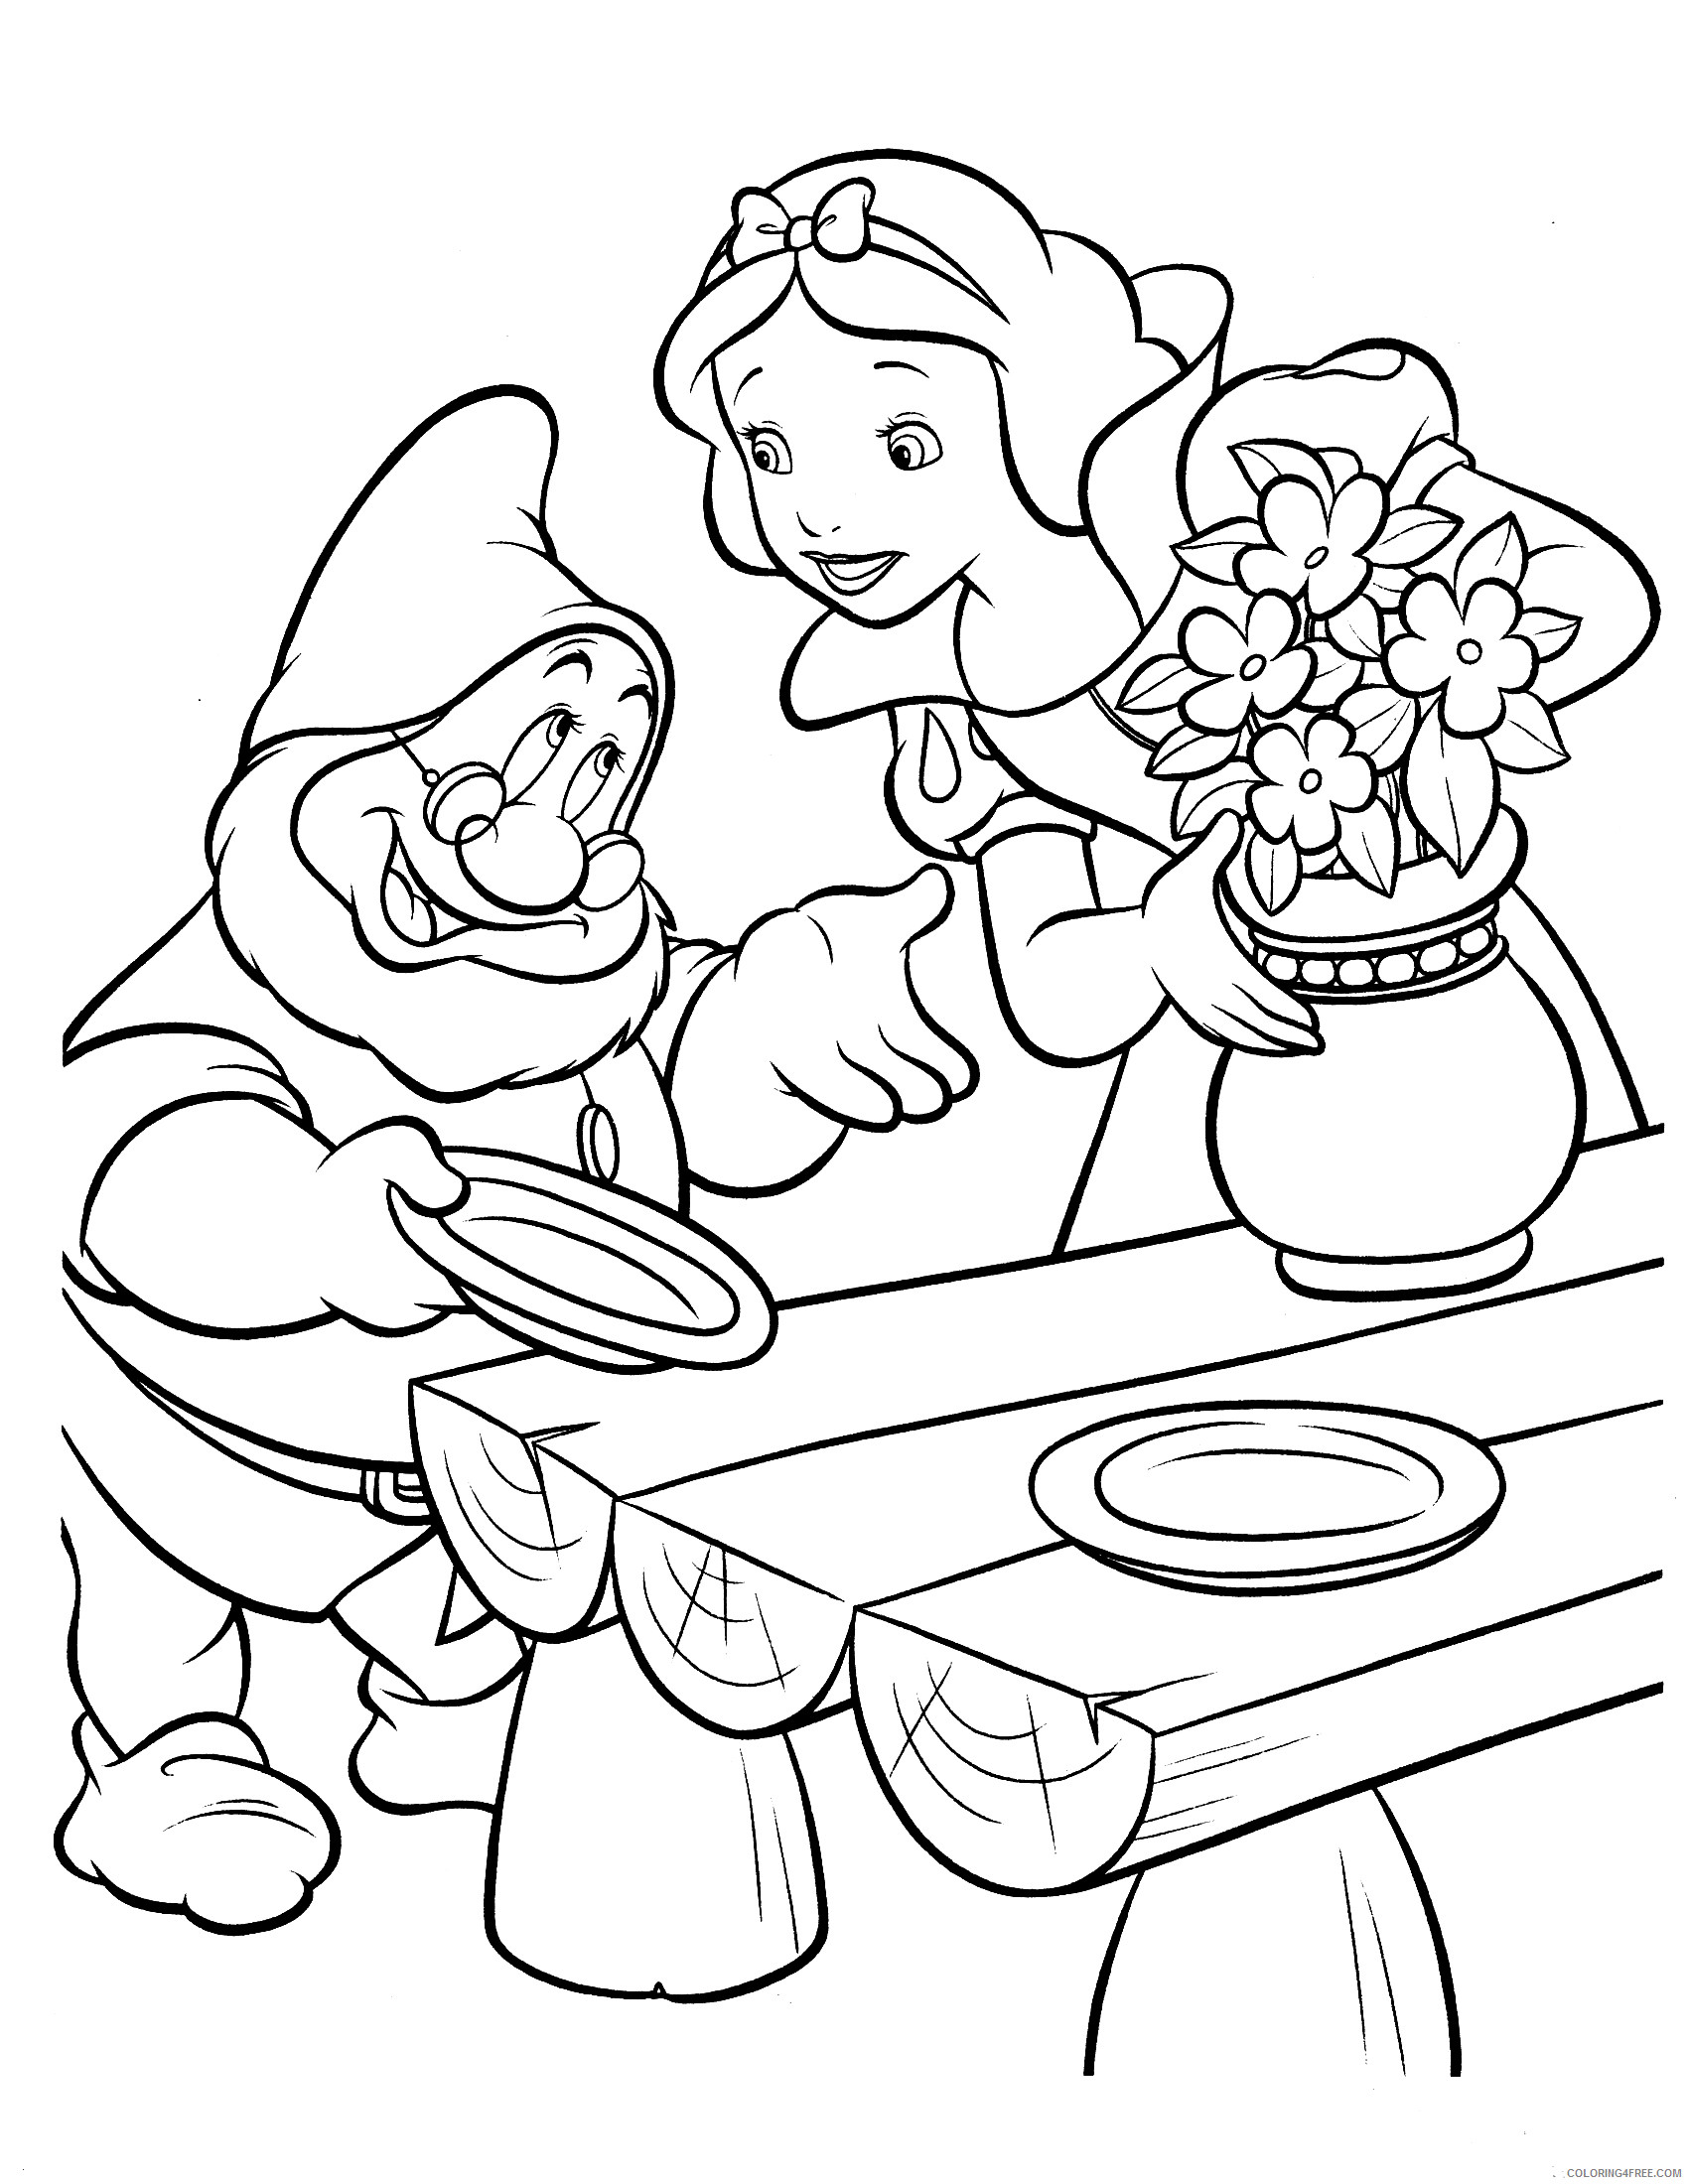 snow-white-coloring-pages-cartoons-free-snow-white-2-printable-2020